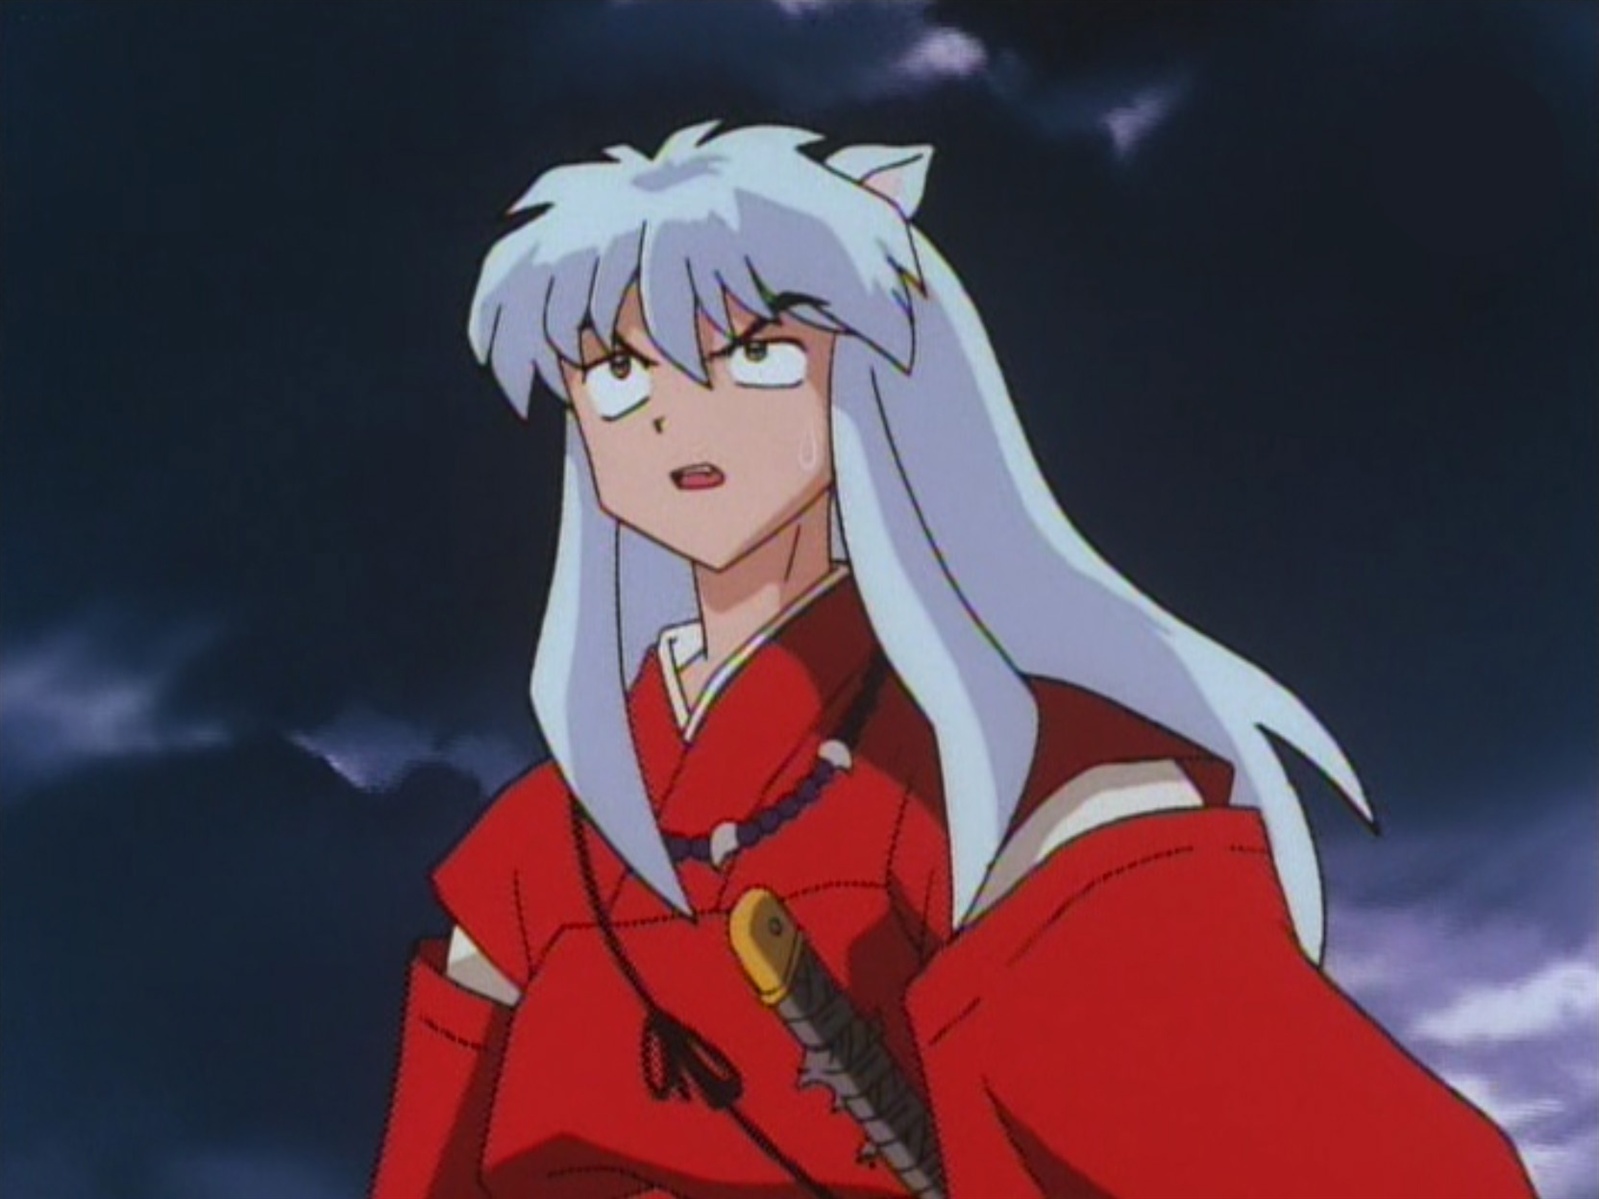 After Inuyasha arrives to the scene where Kagome is being held captive by t...